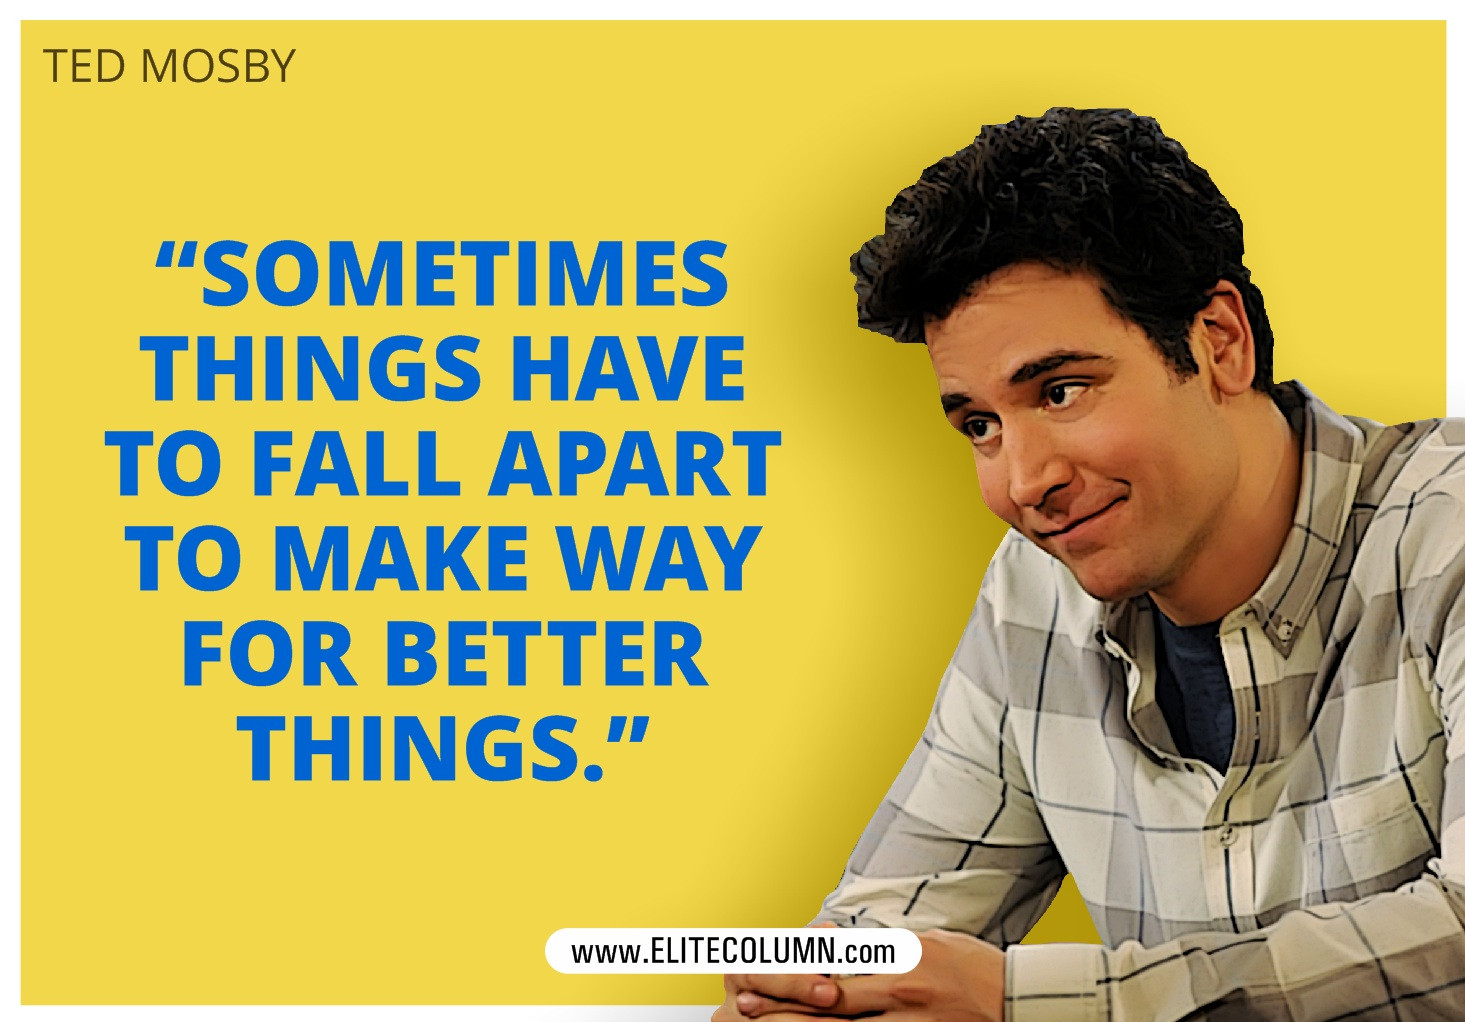 Best How I Met Your Mother Quotes
 12 Best e Liners From How I Met Your Mother